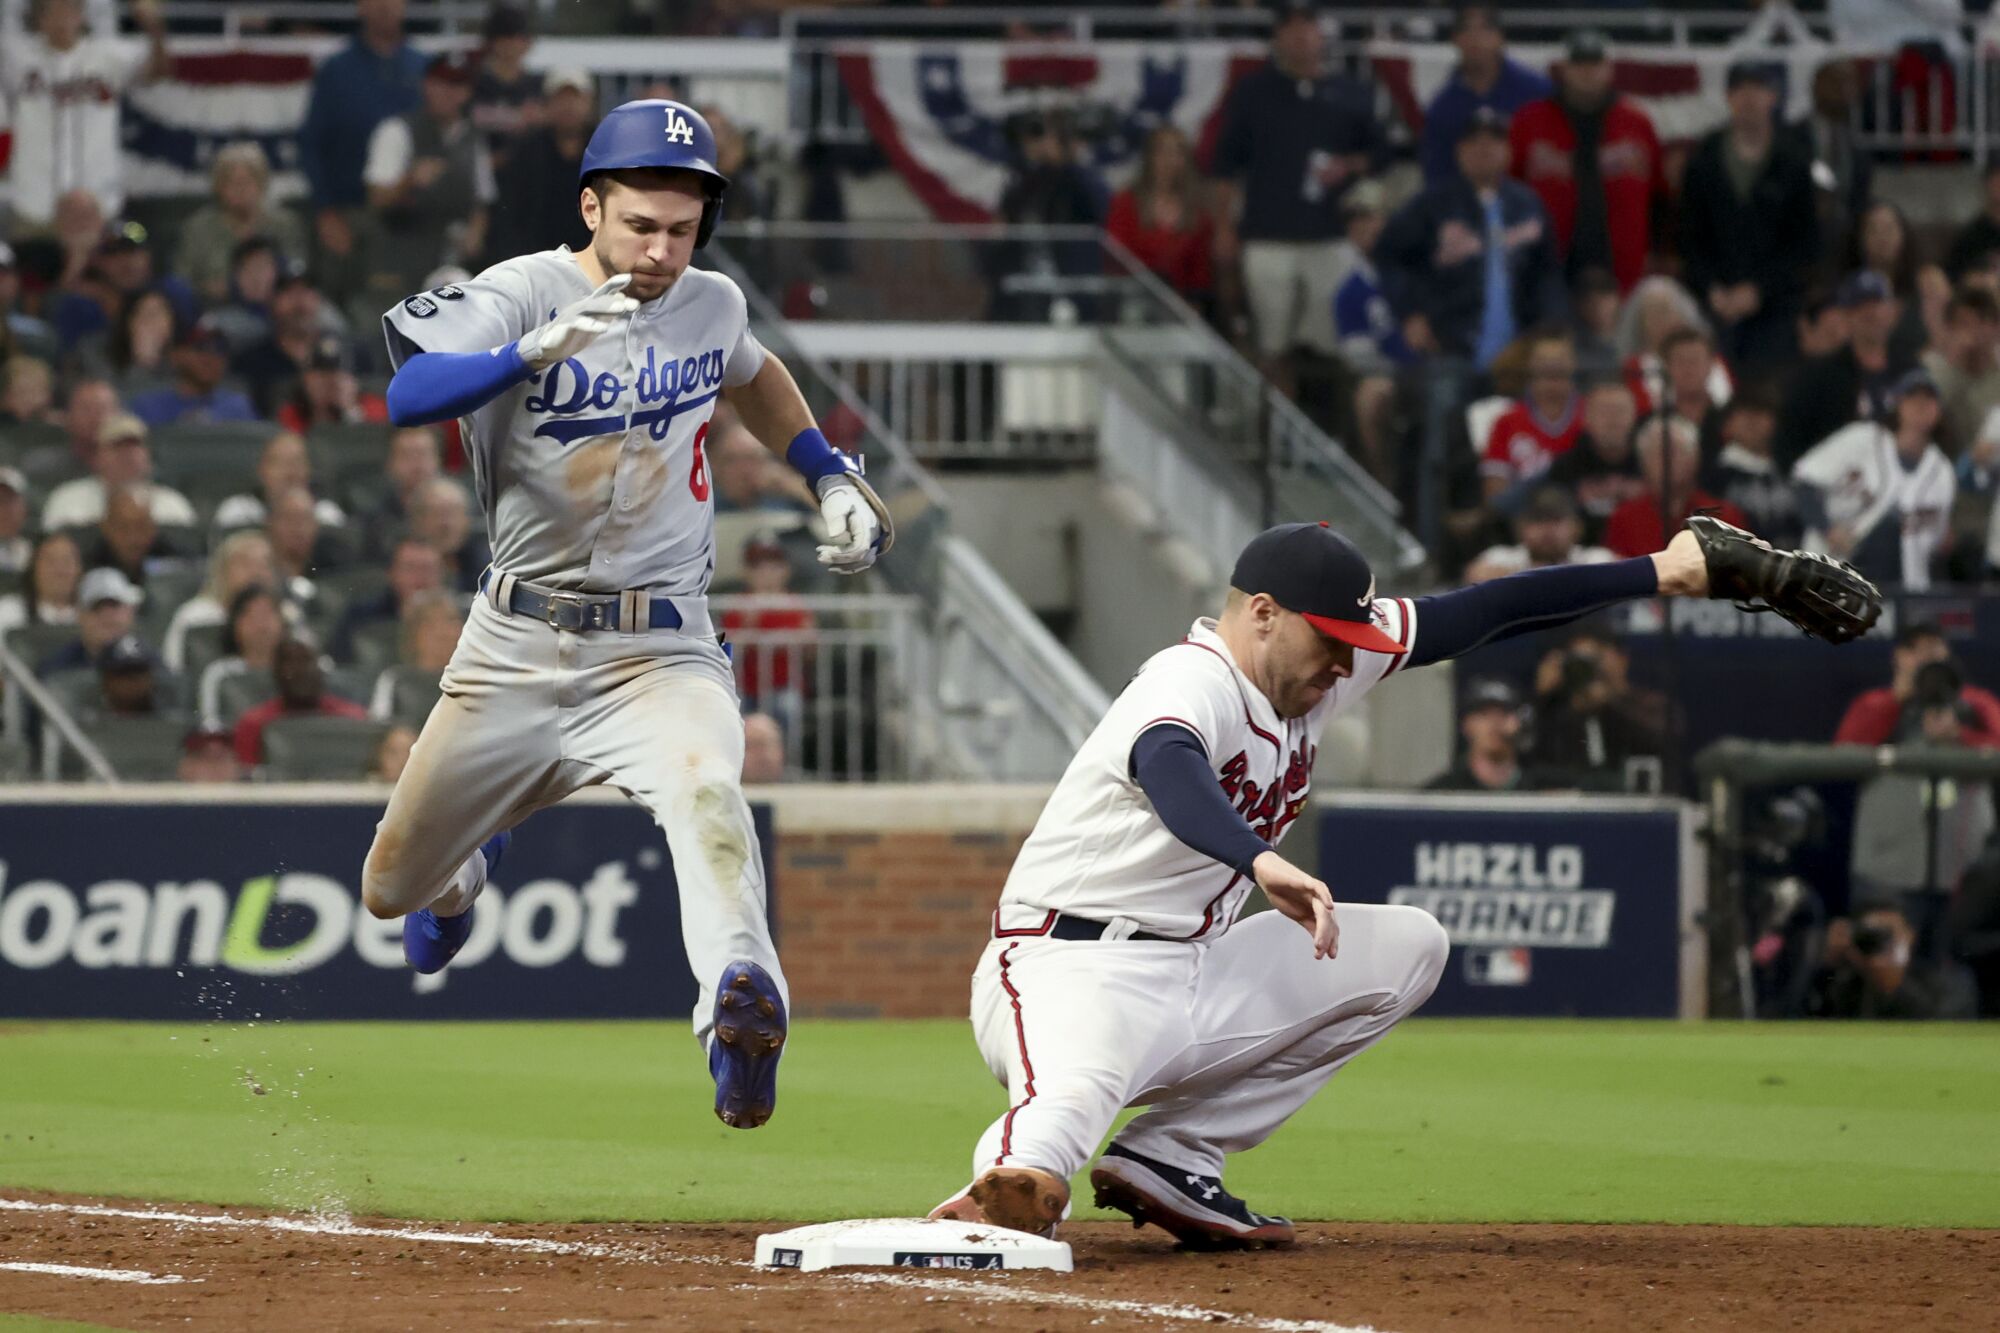 Braves first baseman Freddie Freeman, right, forces out Dodgers' Trea Turner at first on an infield ground ball